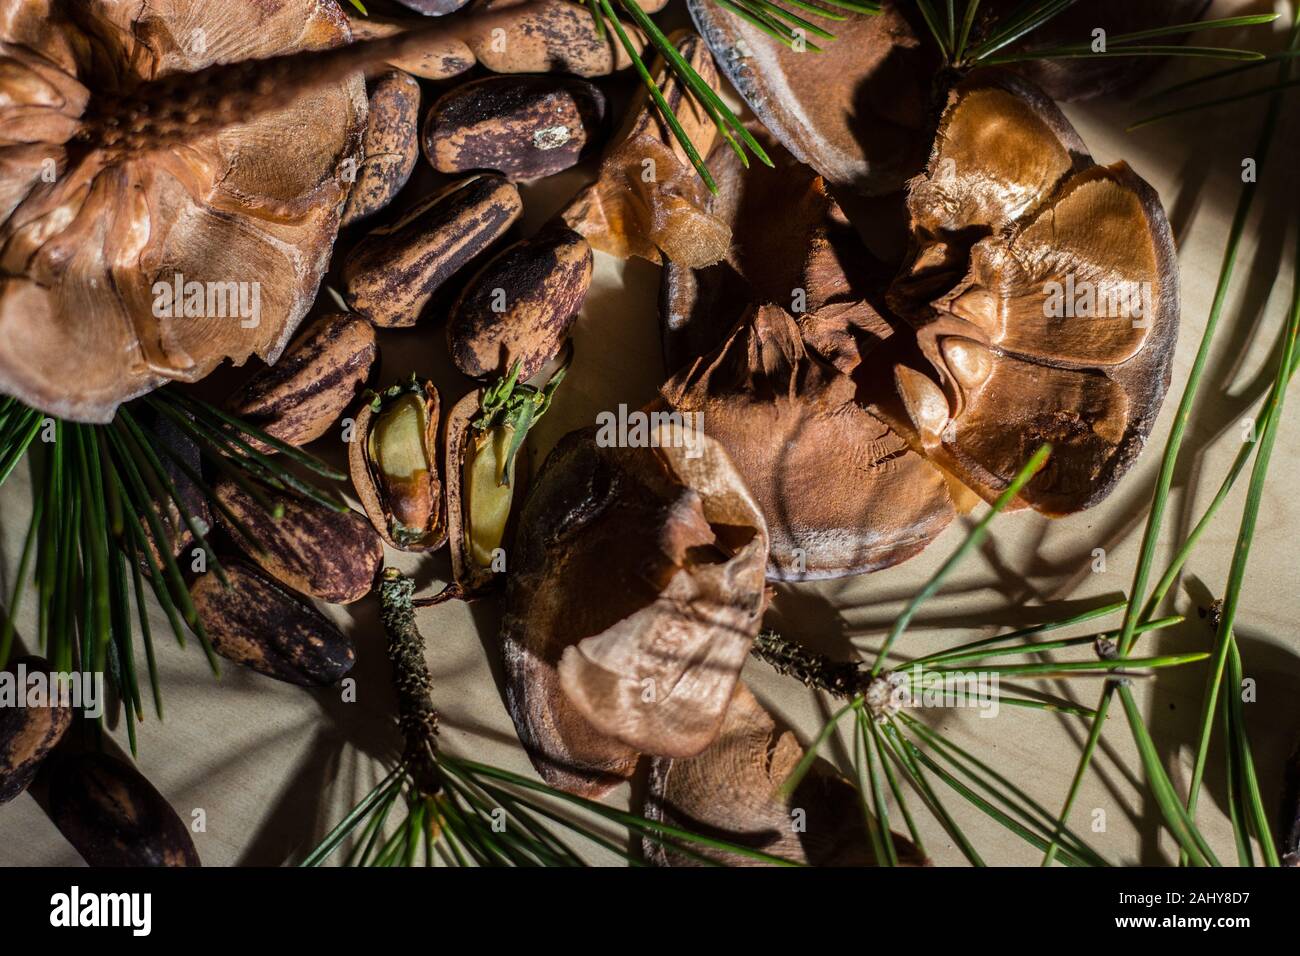 Strobilo, commonly called pine cone, used in Christmas decorations Stock Photo